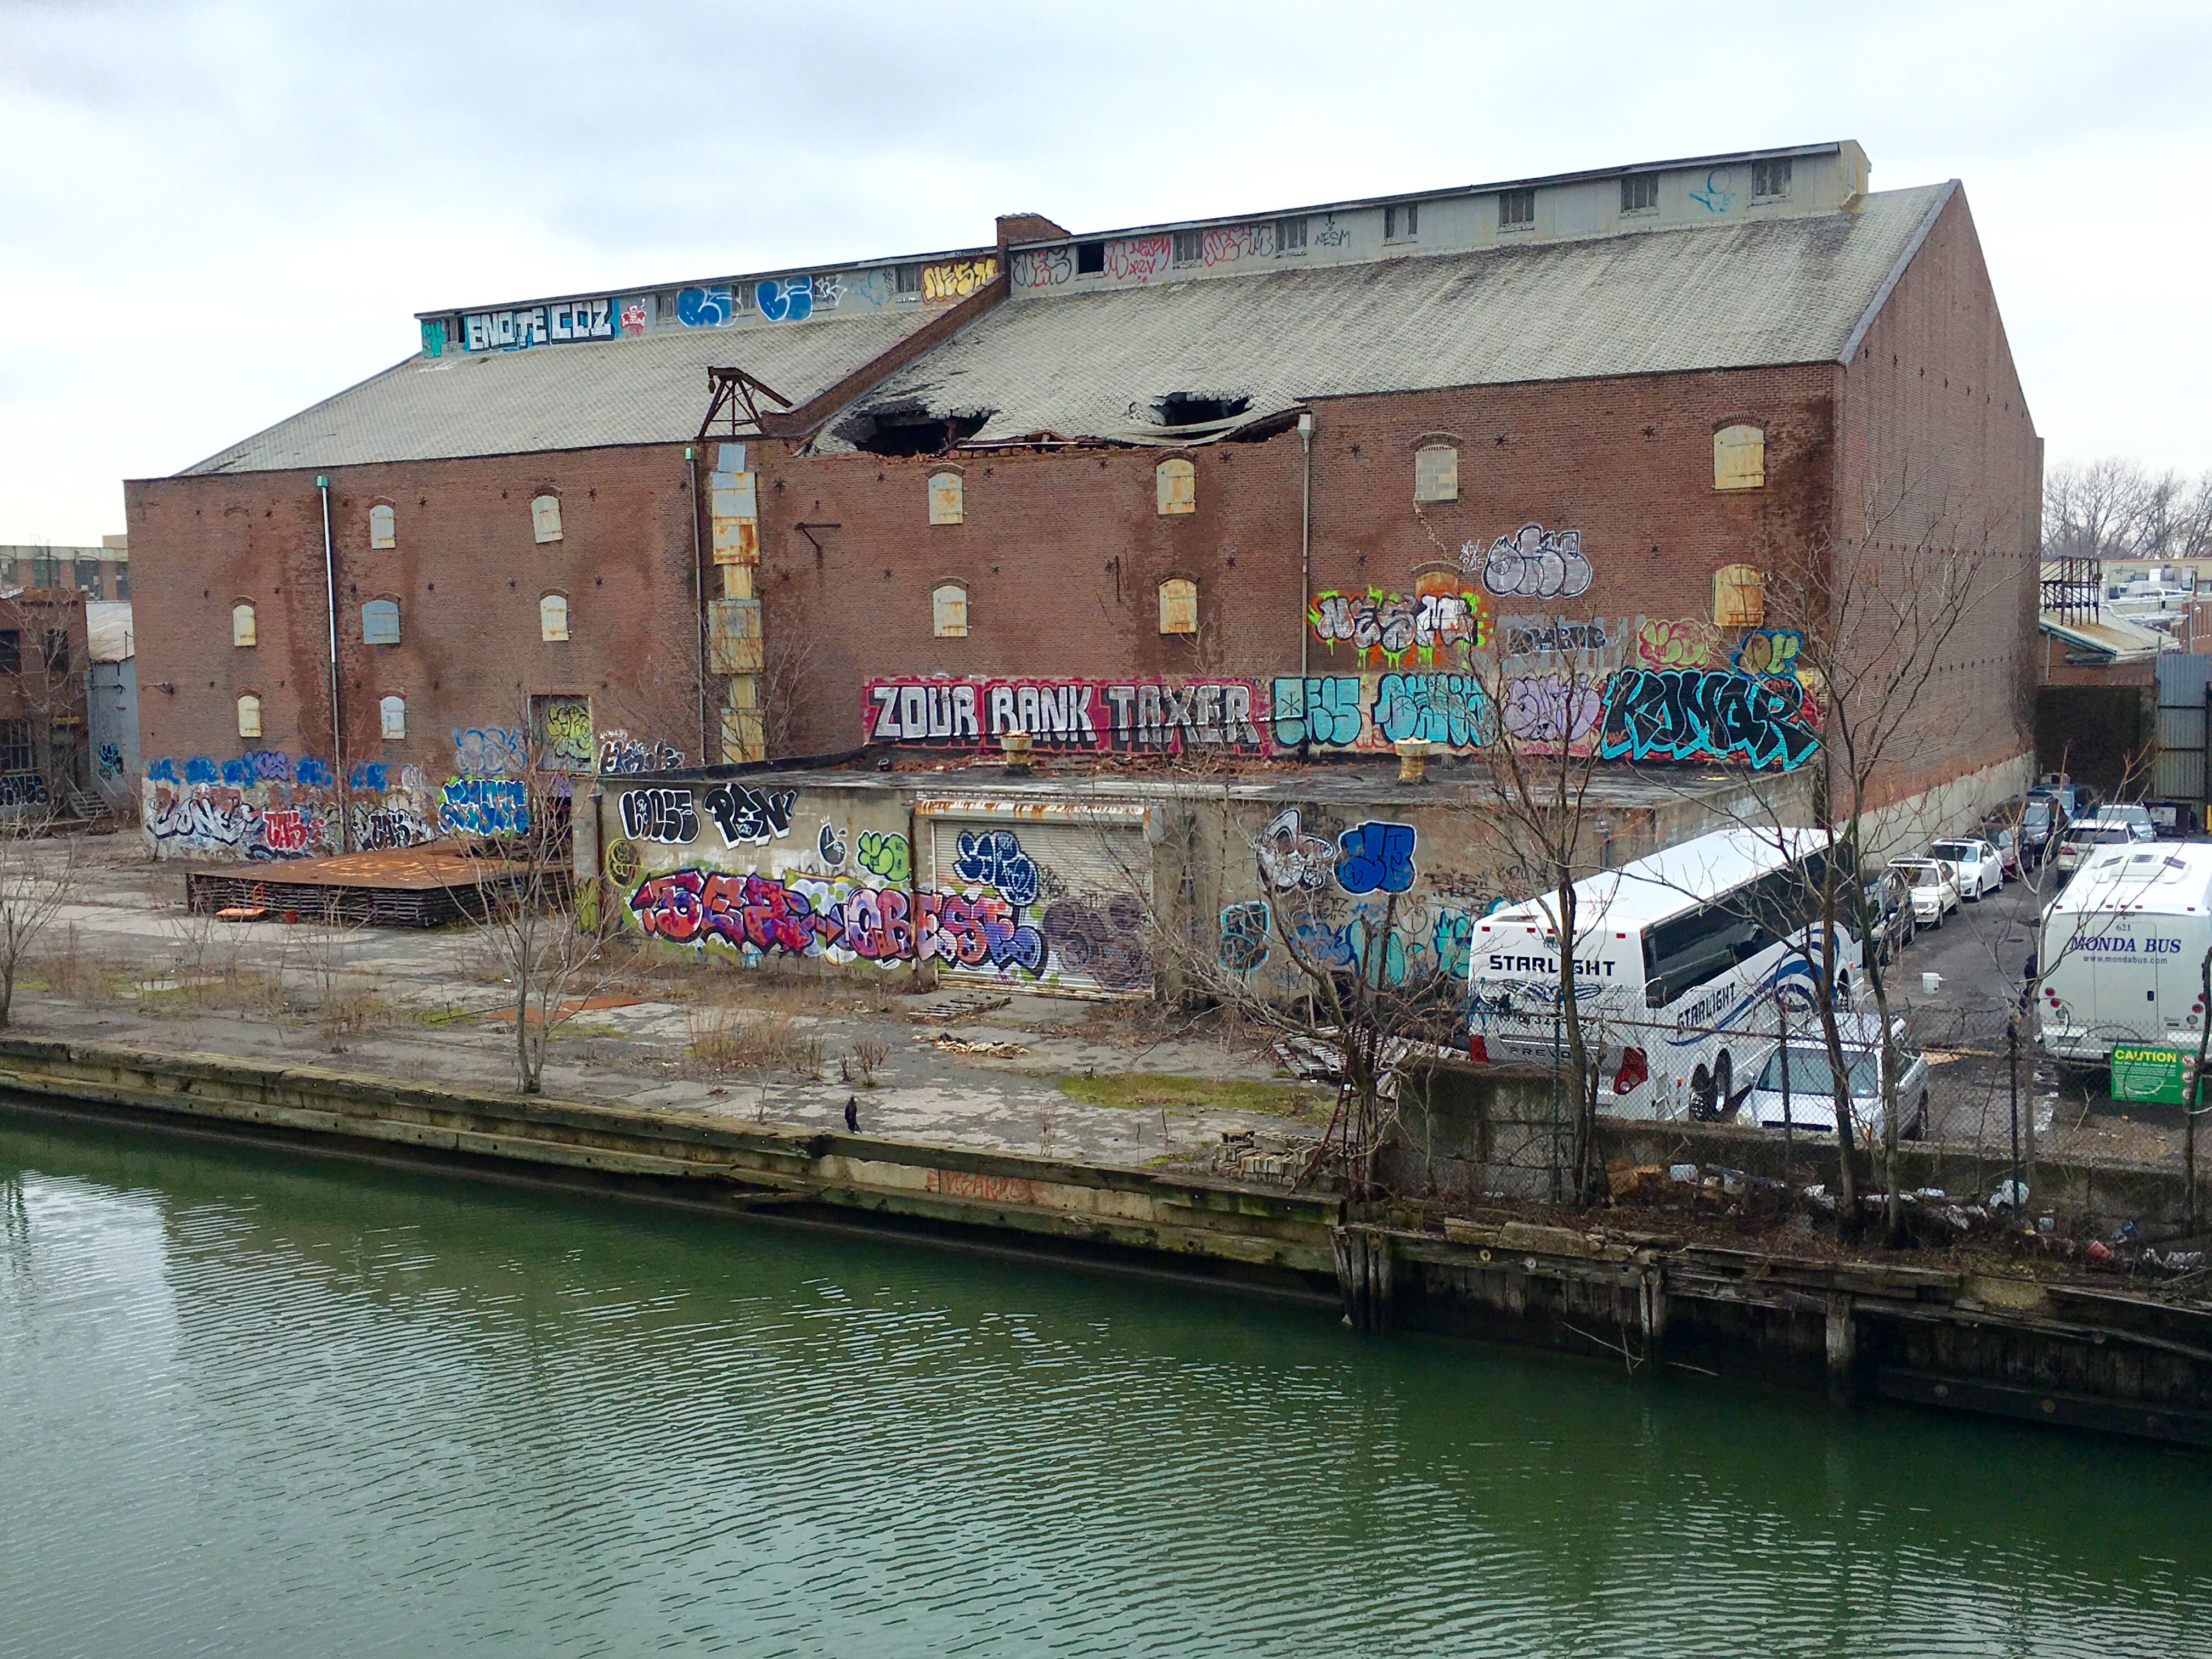 This is what Red Hook’s S.W. Bowne Grain Storehouse looked like in 2016. Photo: Lore Croghan/Brooklyn Eagle